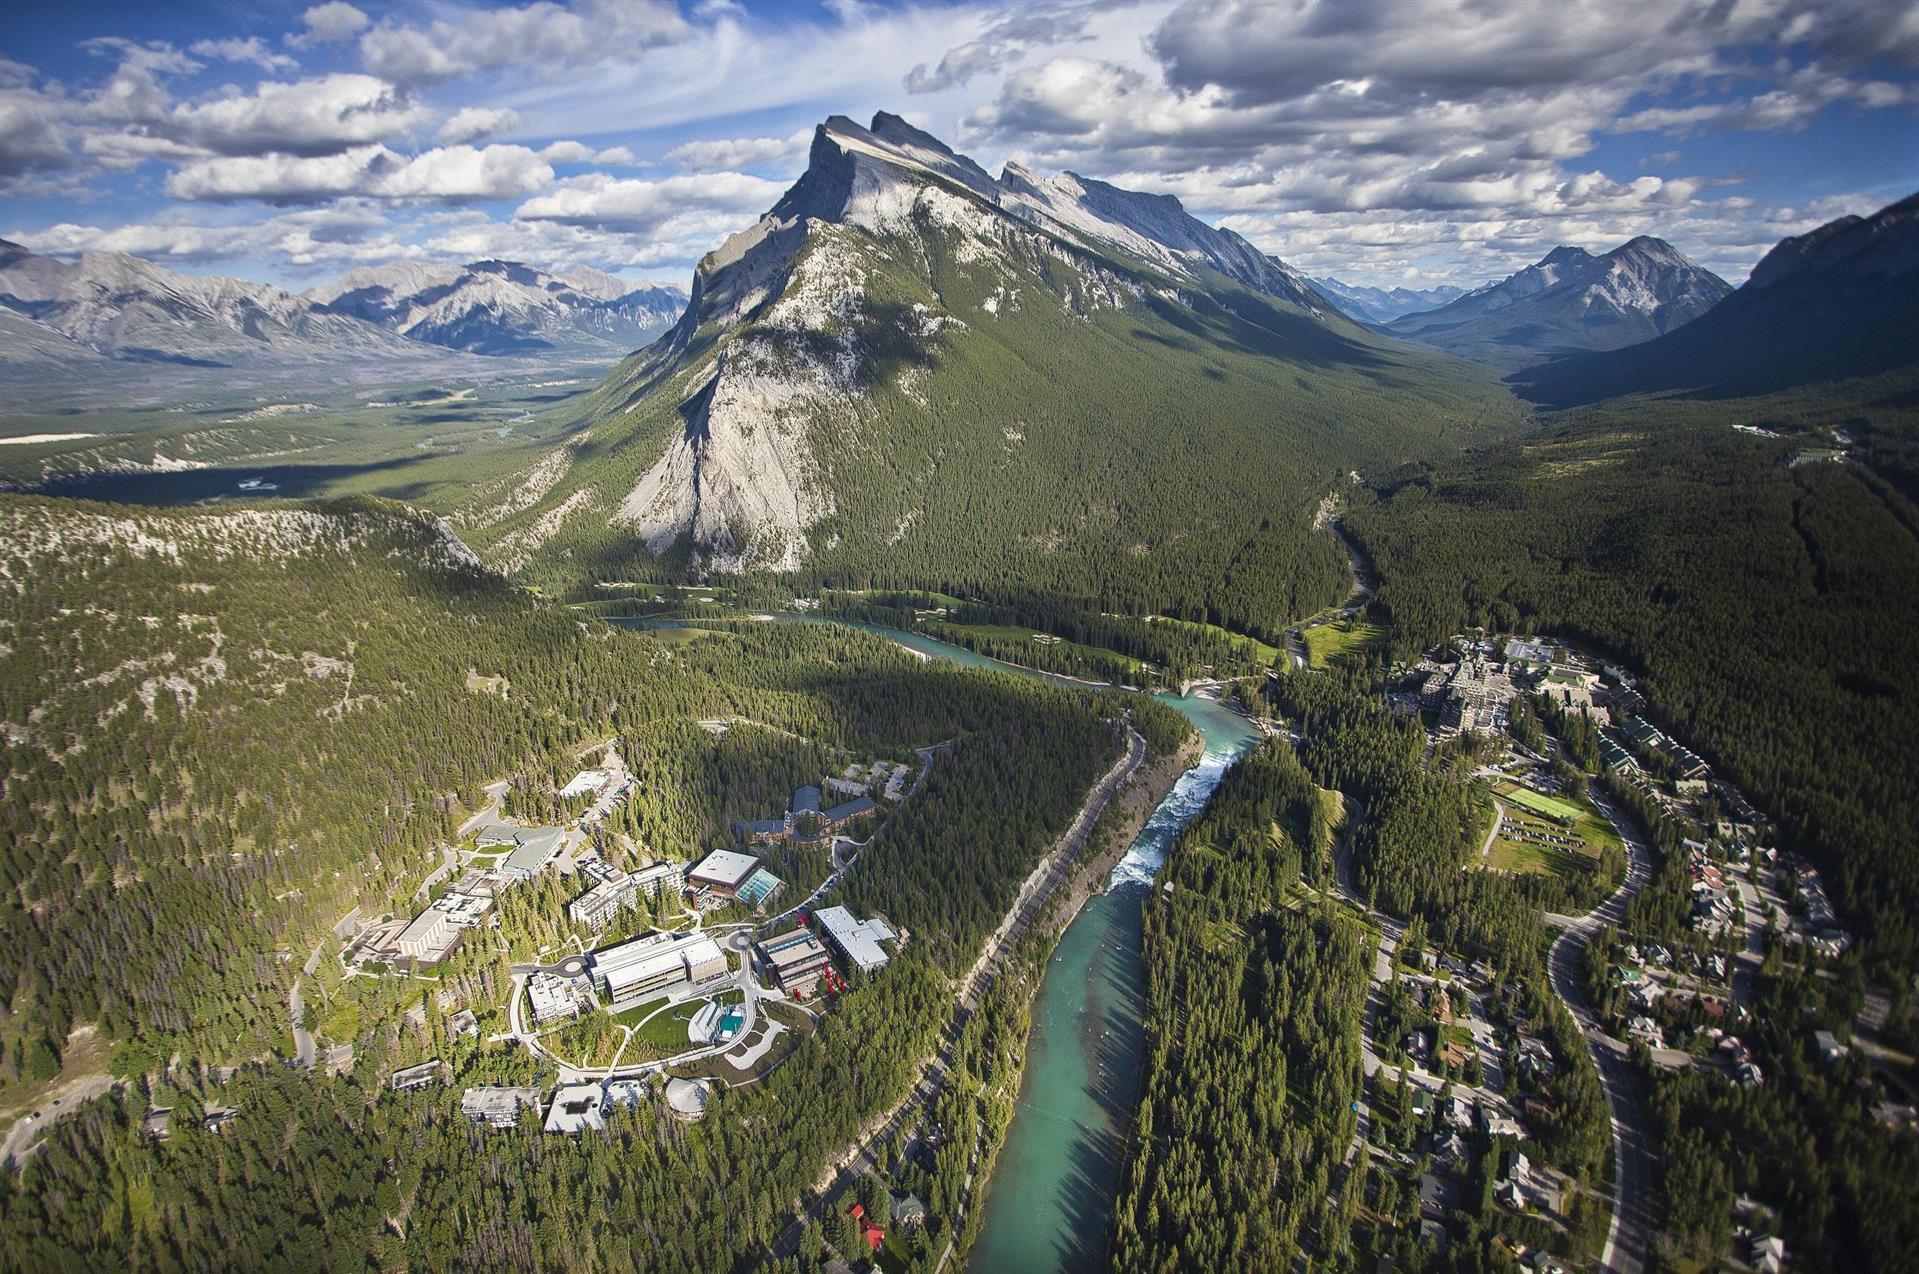 Banff Centre for Arts and Creativity in Banff, AB